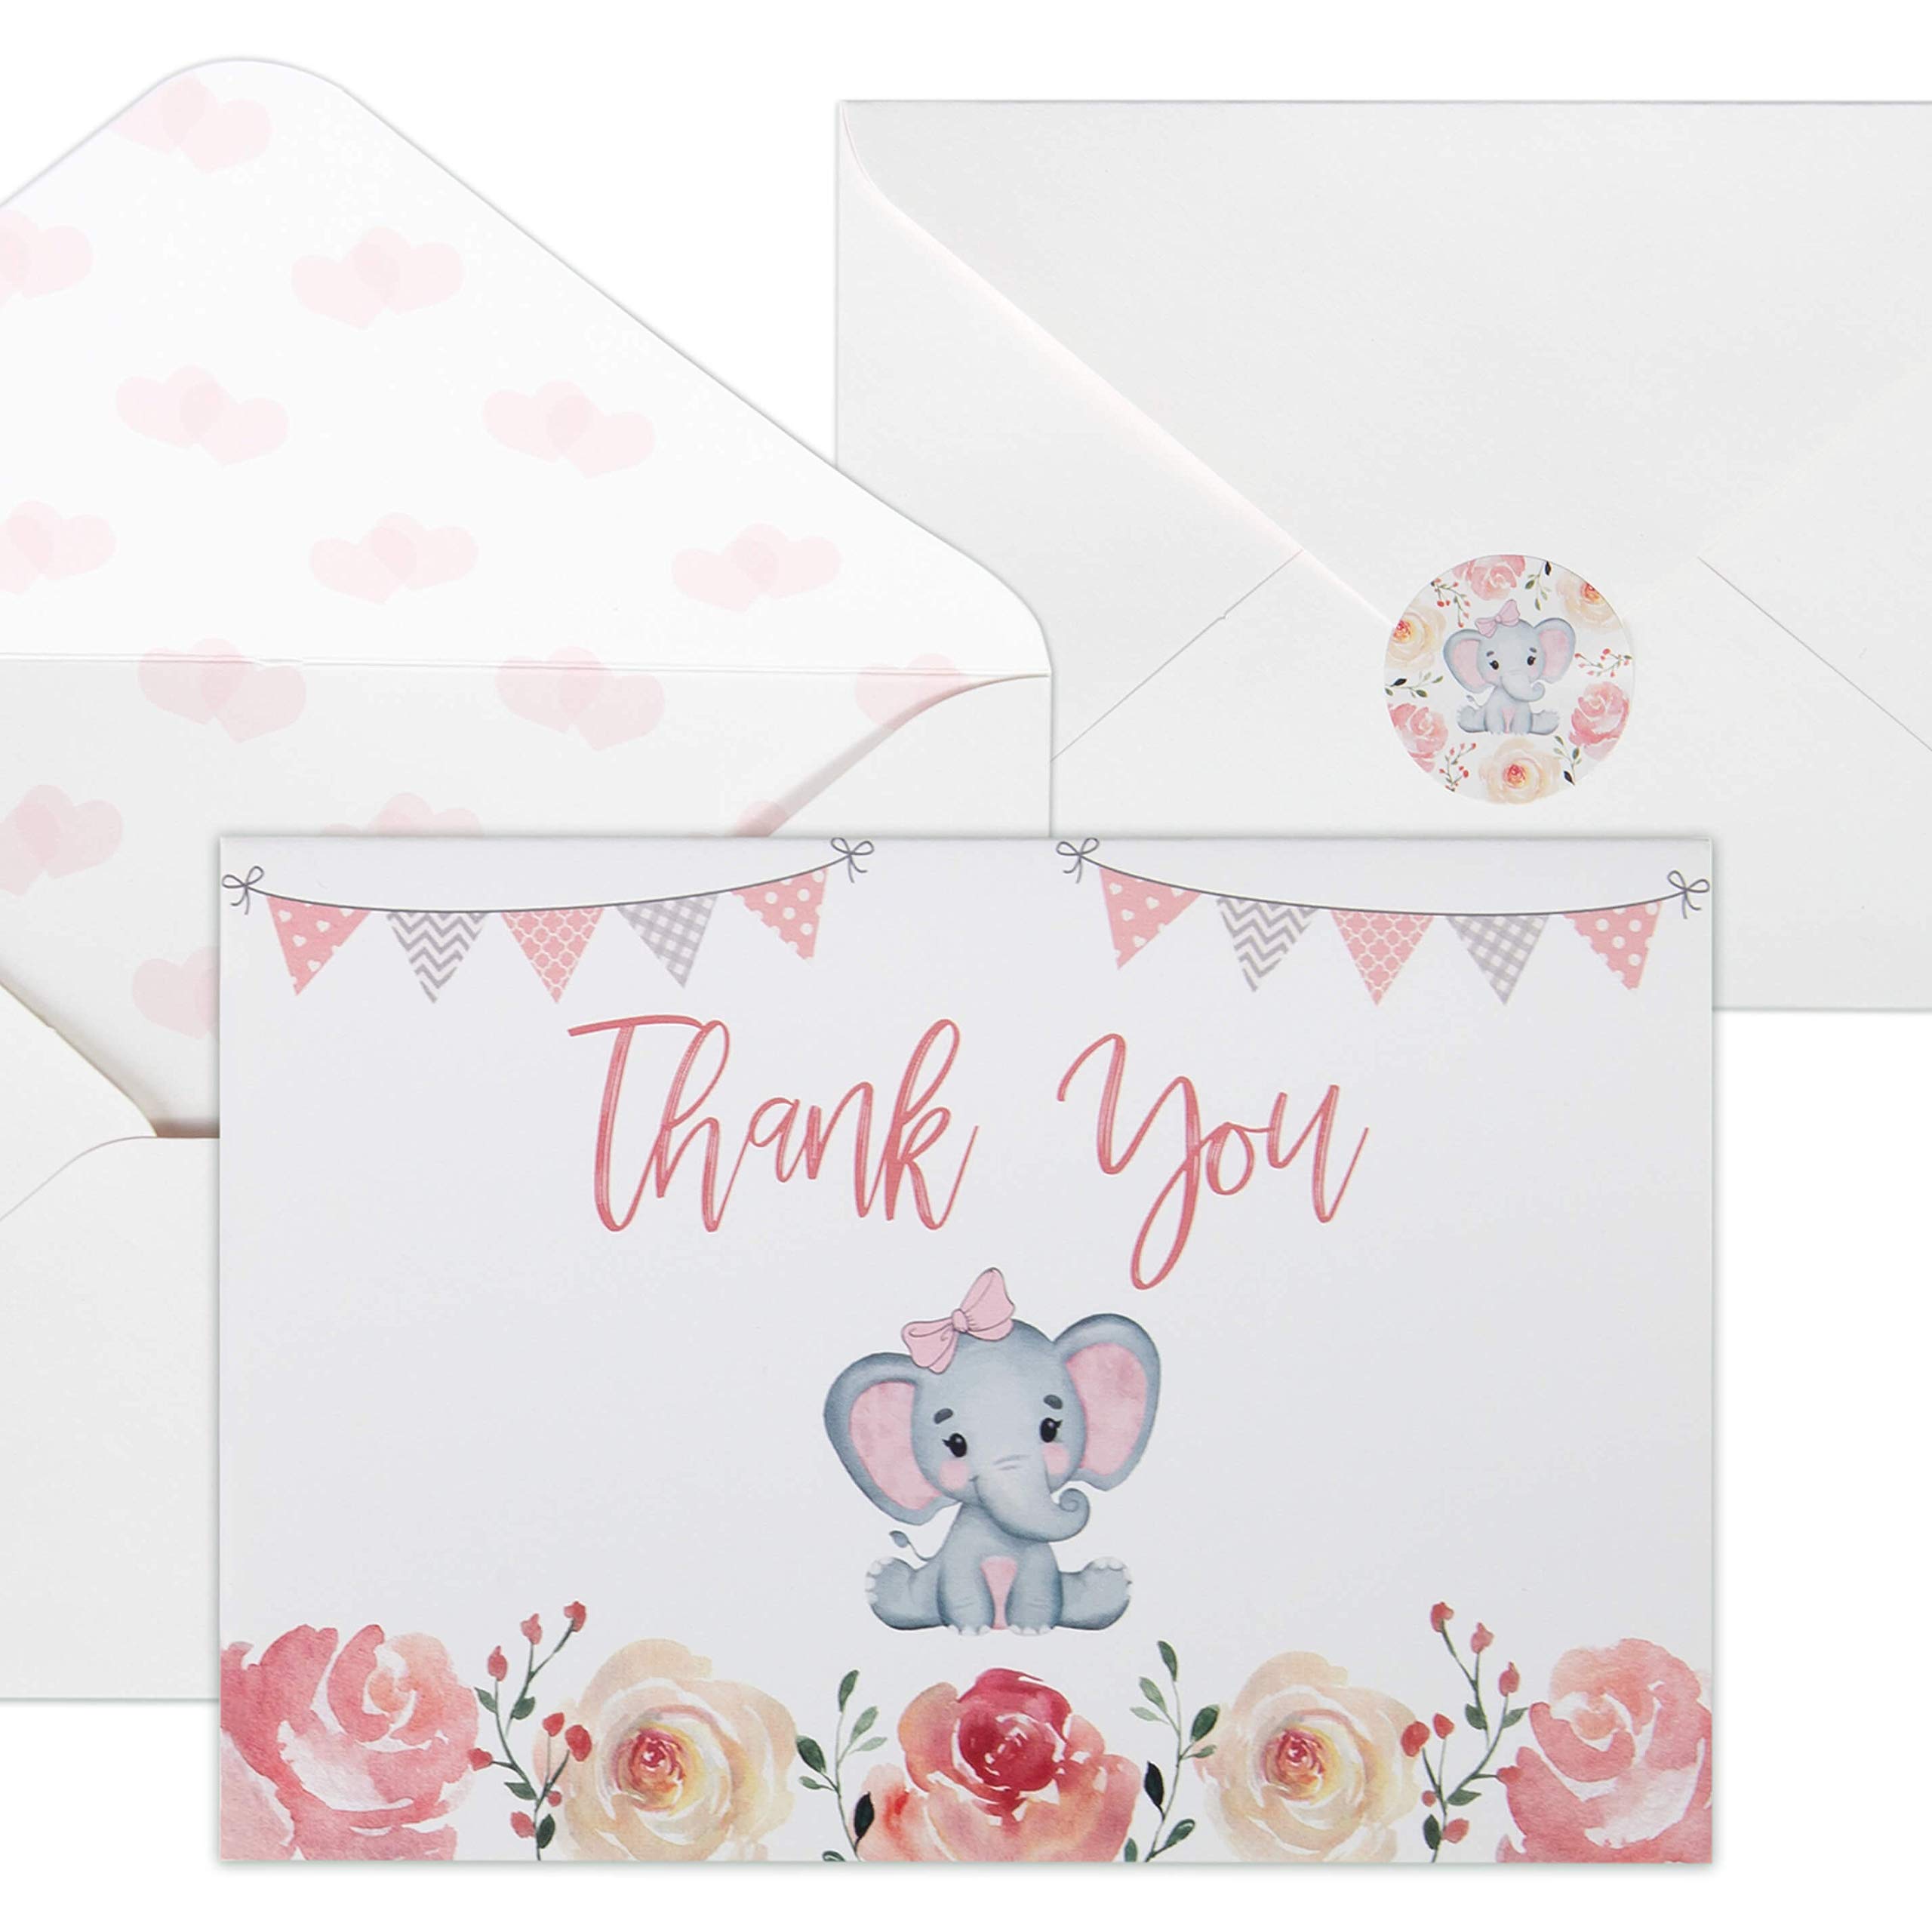 VNS Creations Baby Shower Thank You Cards for Girls. 50 Pack Pink Watercolor Elephant Baby Girl Cards. Cute Thank You Notes with Envelopes & Stickers.